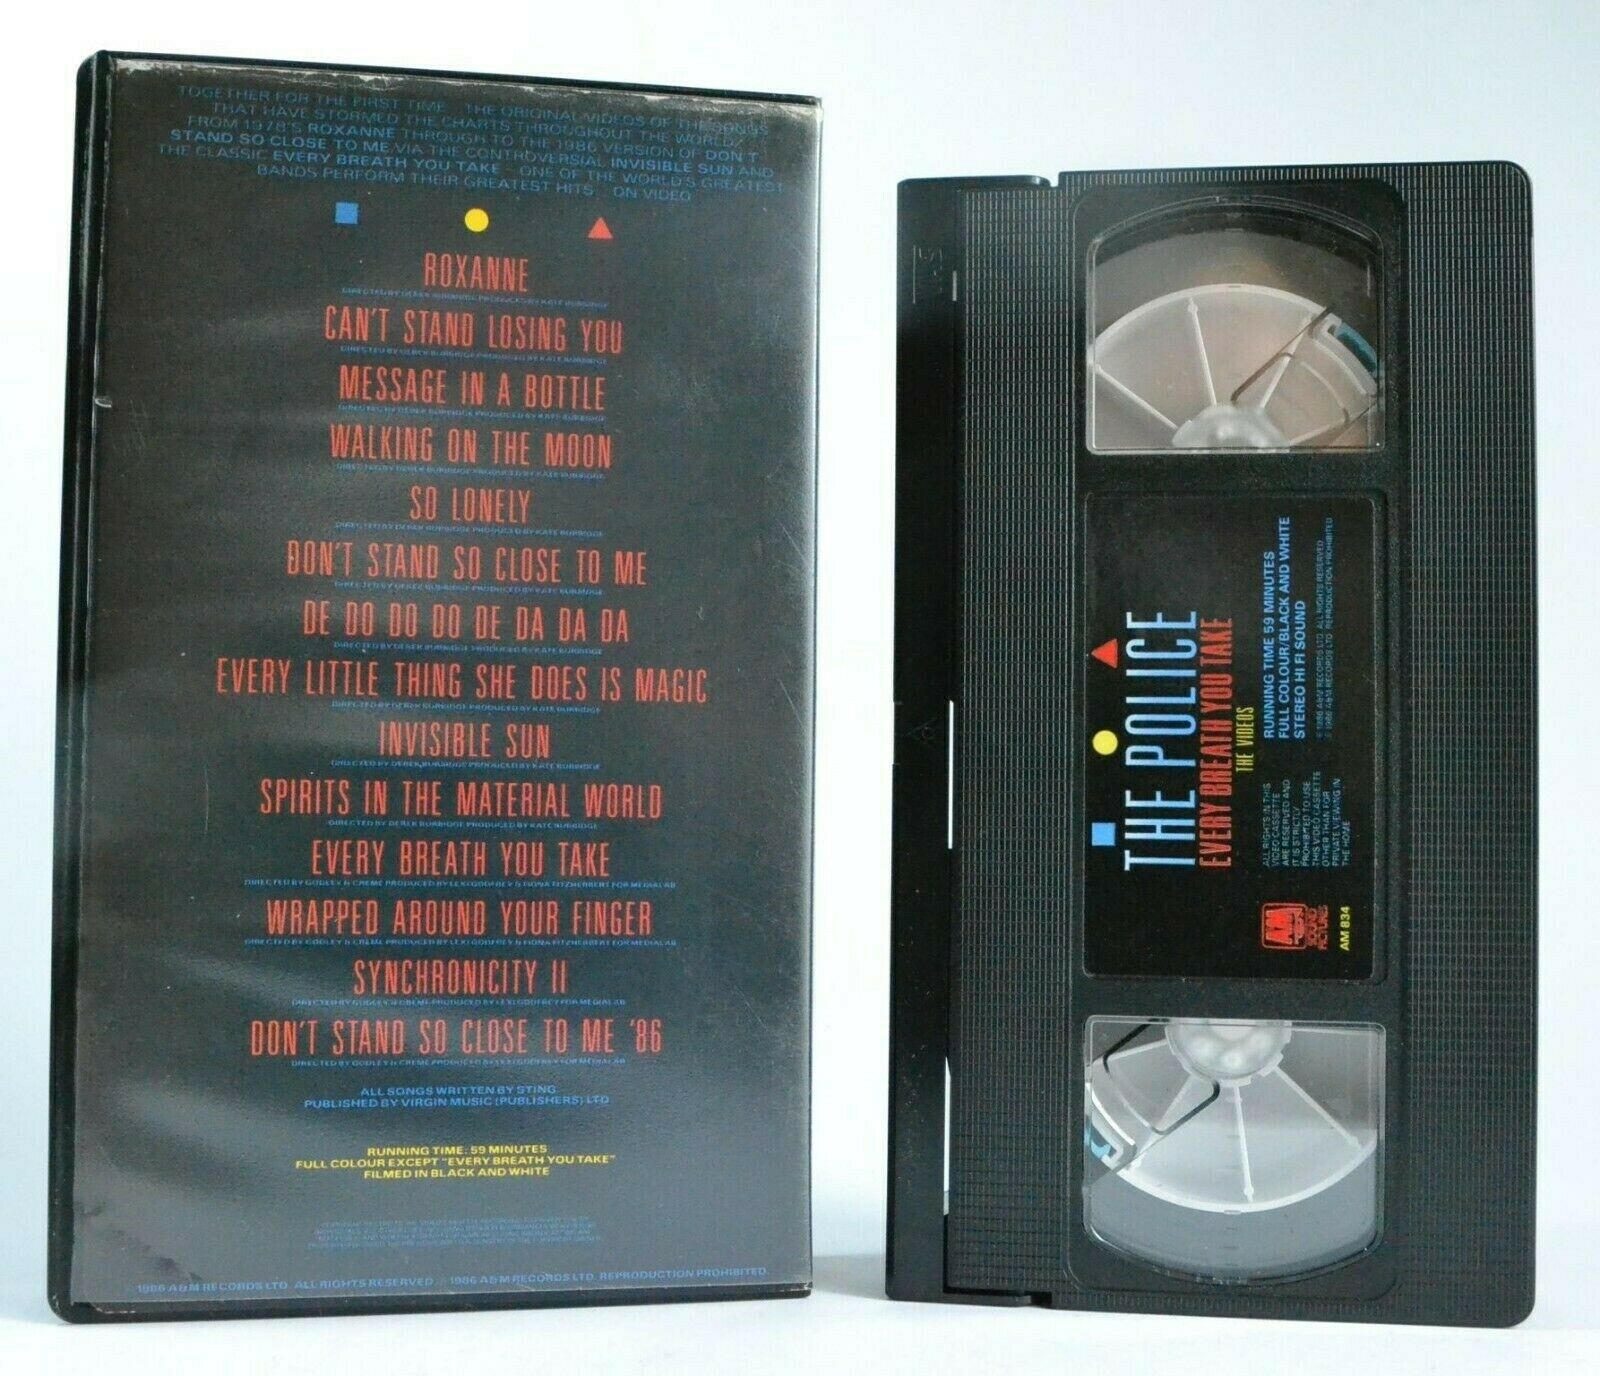 The Police: Every Breath You Take - Music Videos - Greatest Hits - Sting - VHS-